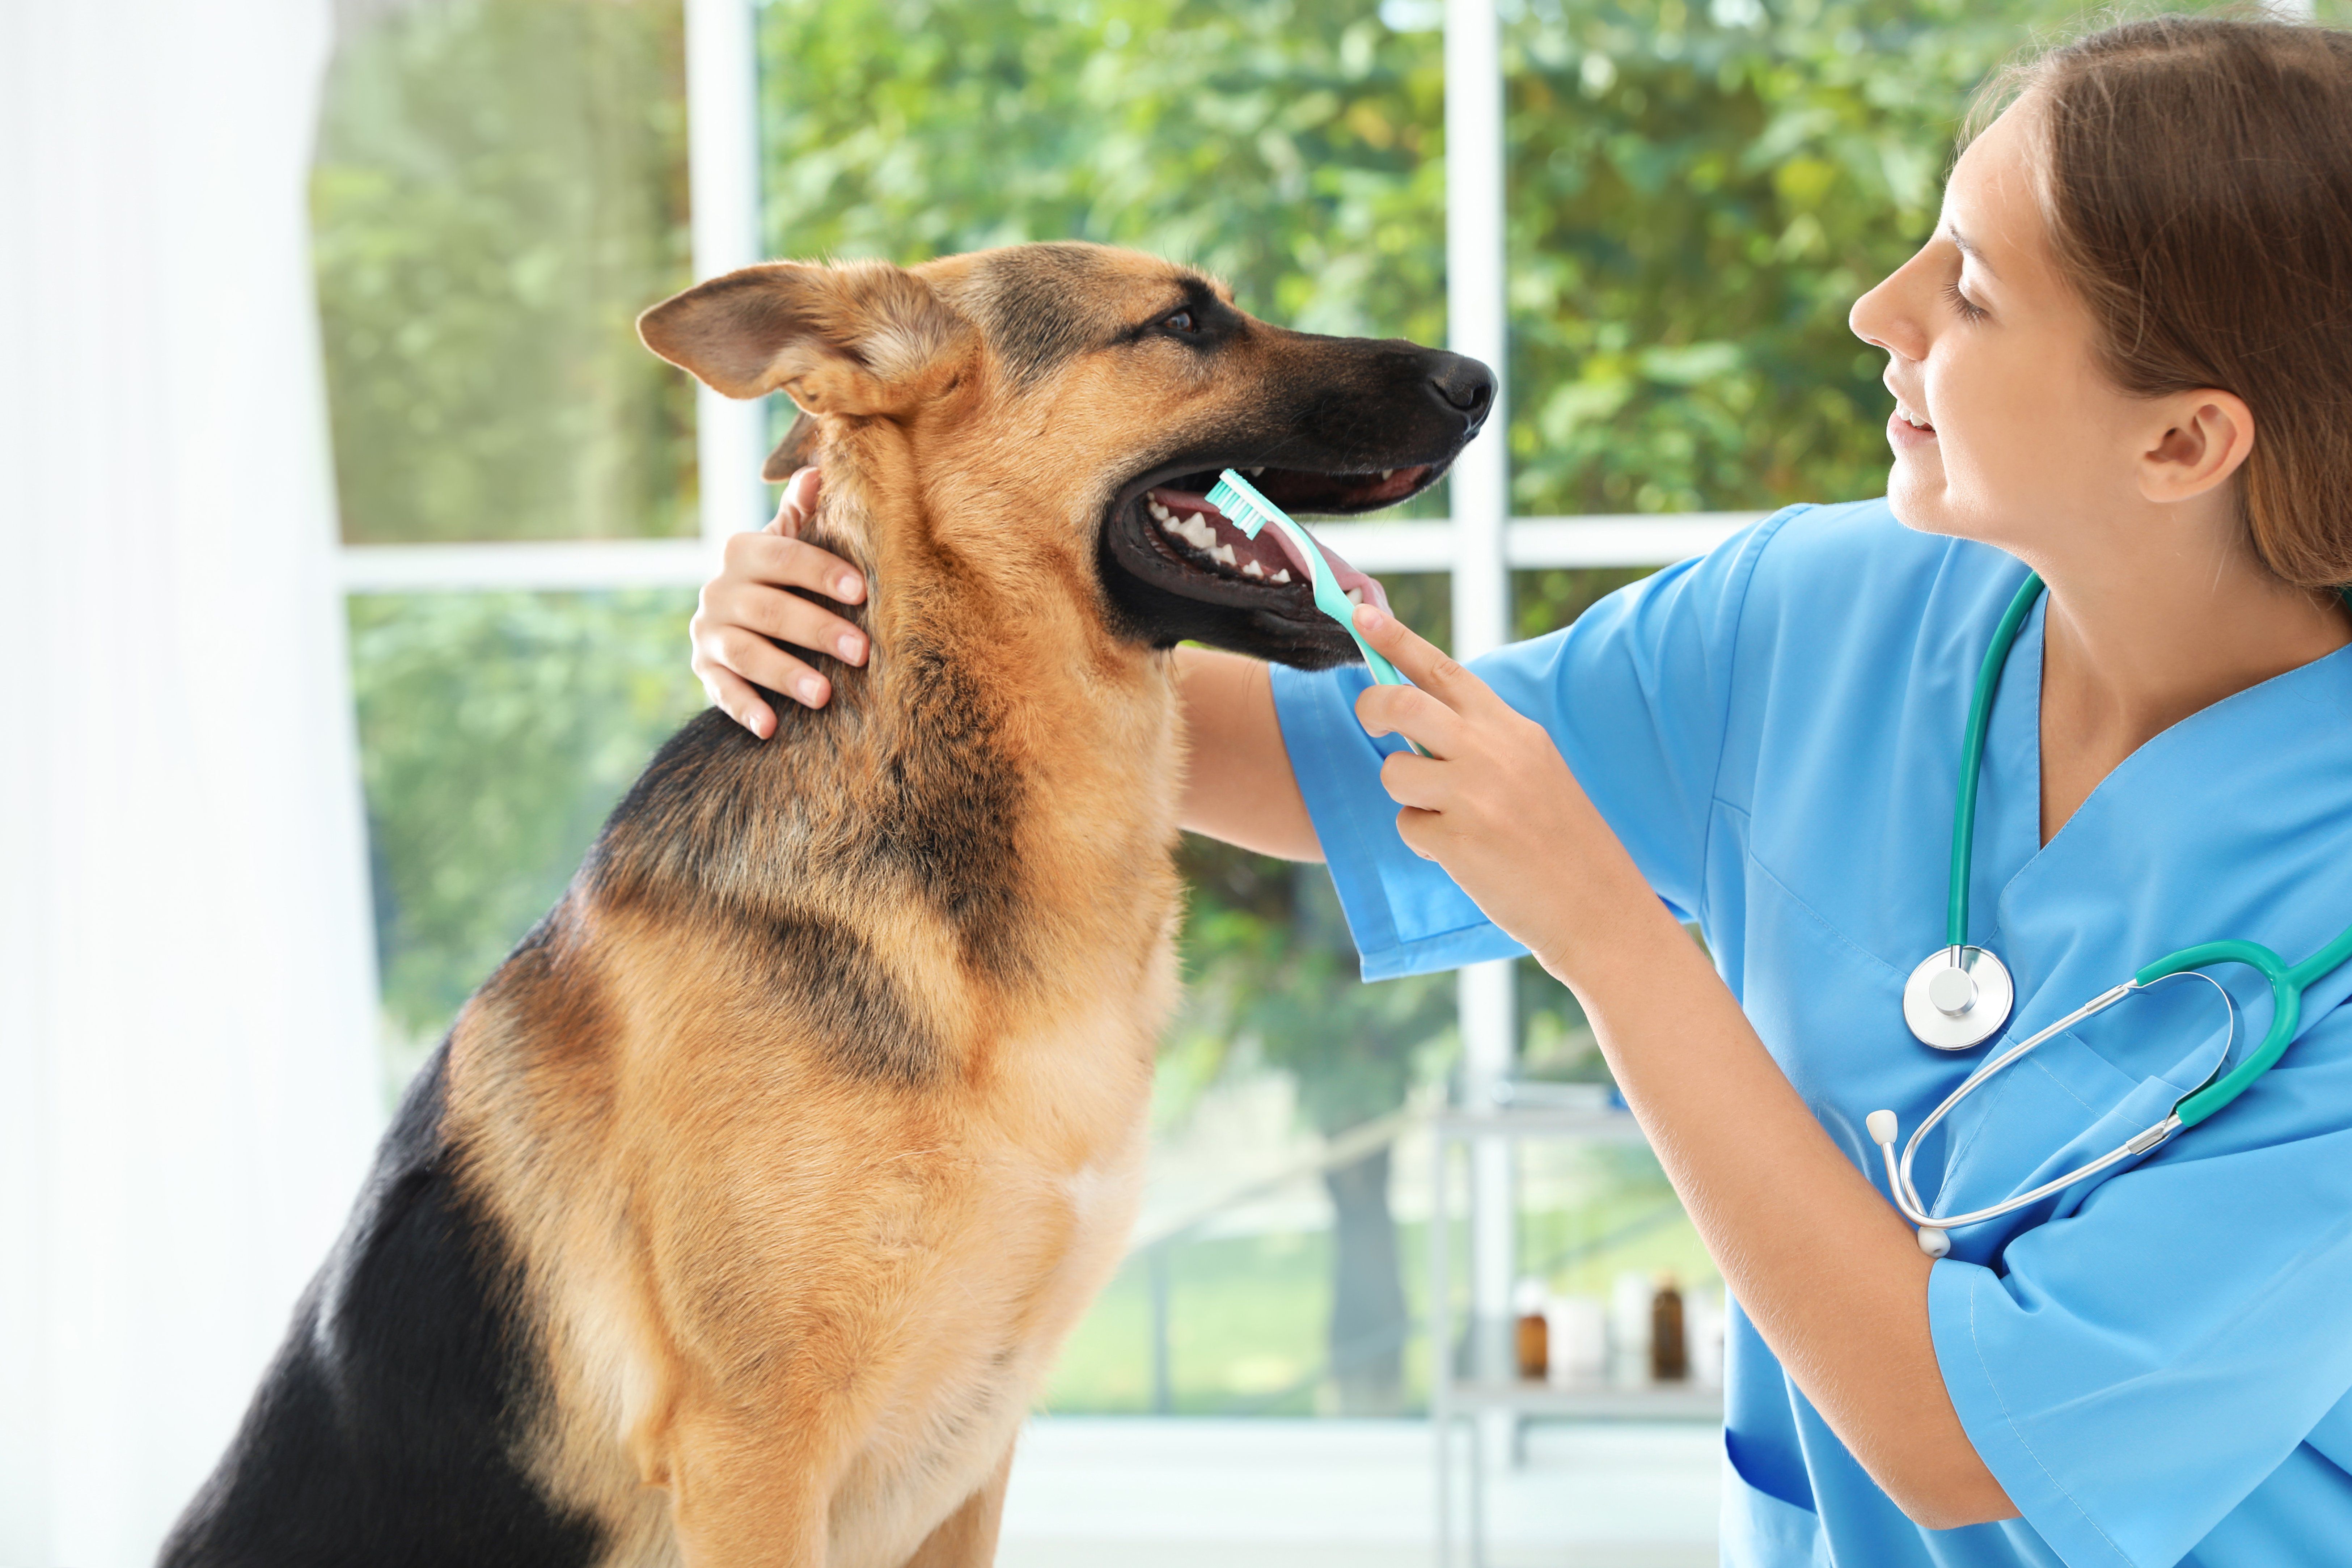 Does Teeth Cleaning Help Dogs Live Longer?